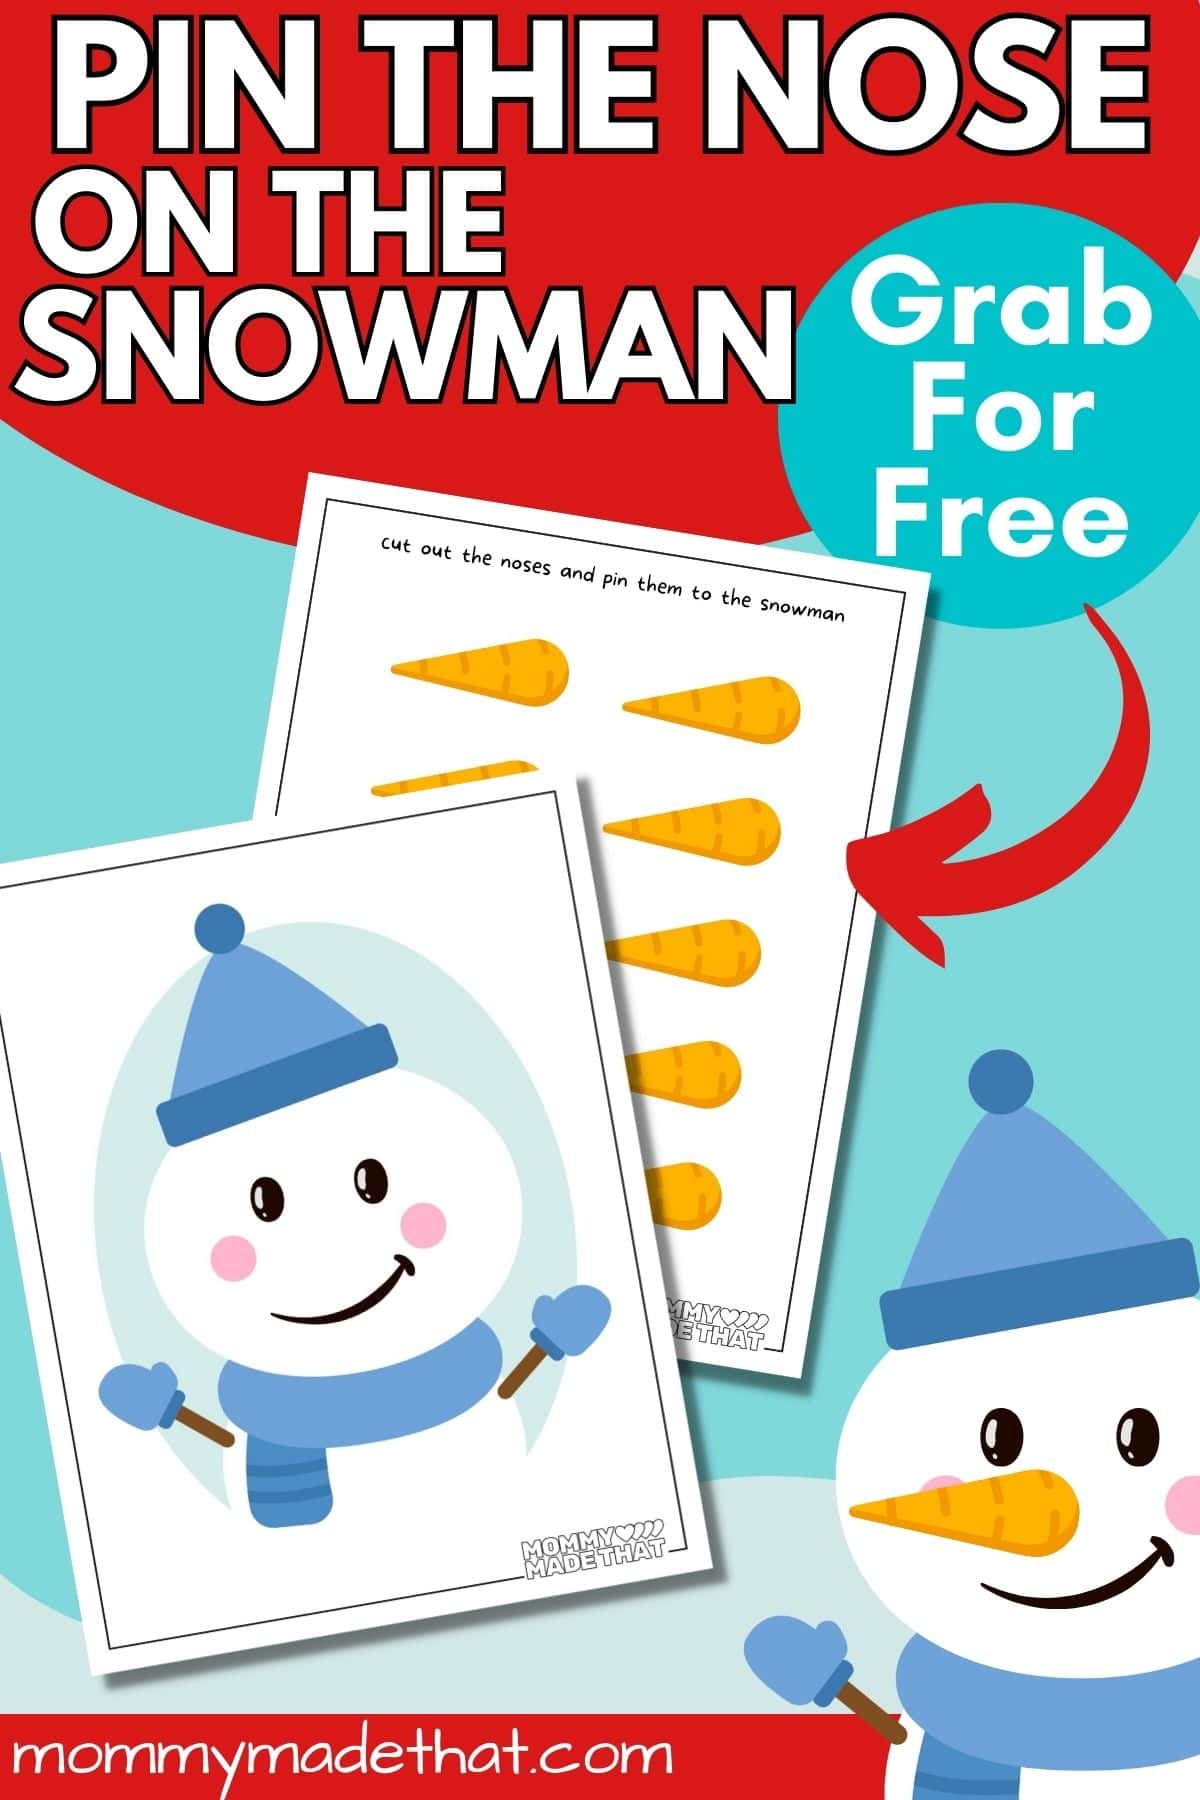 free printable pin the nose on the snowman game for kids